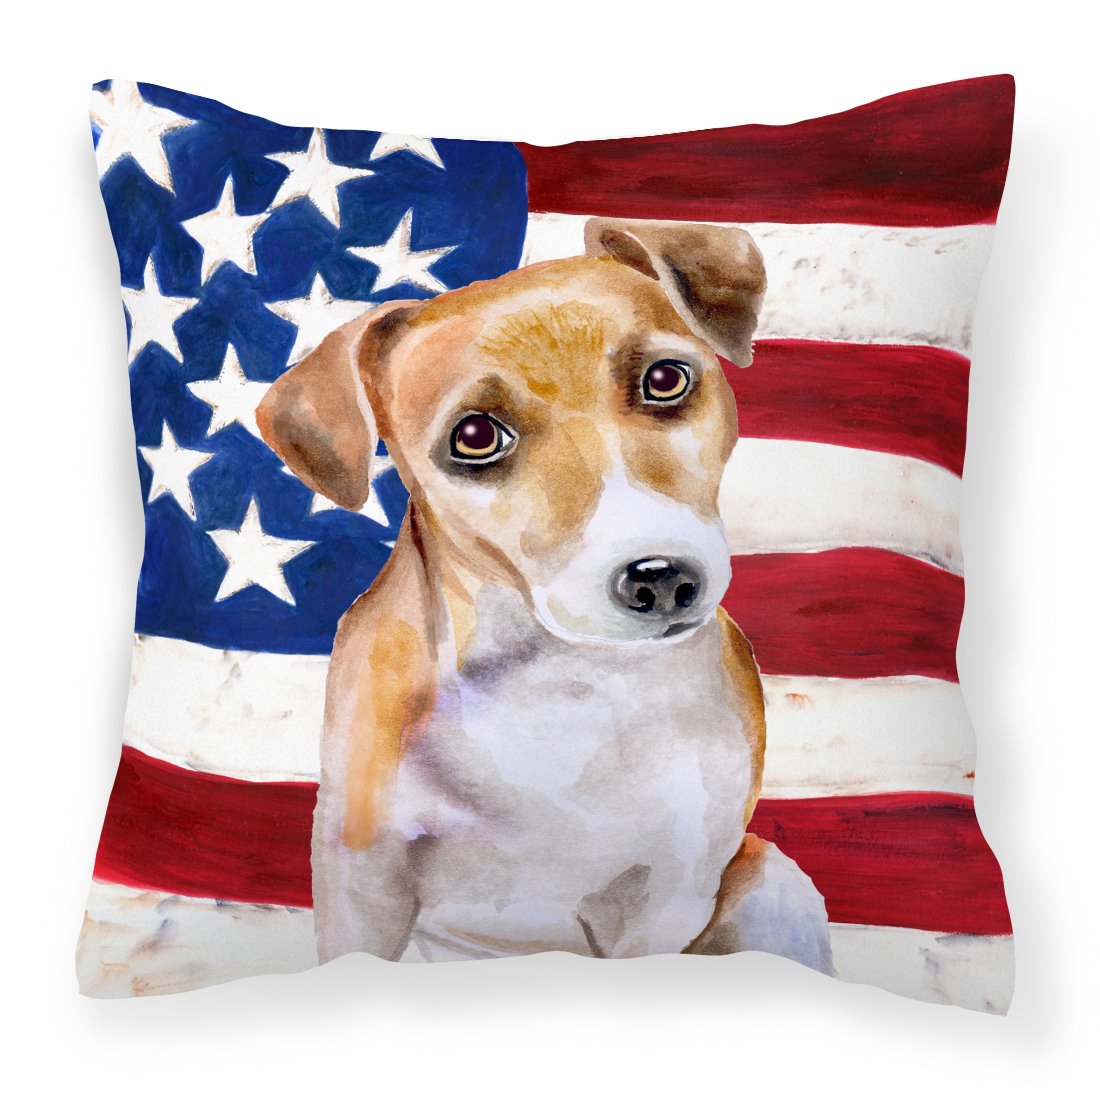 Jack Russell Terrier #2 Patriotic Fabric Decorative Pillow BB9713PW1818 by Caroline's Treasures